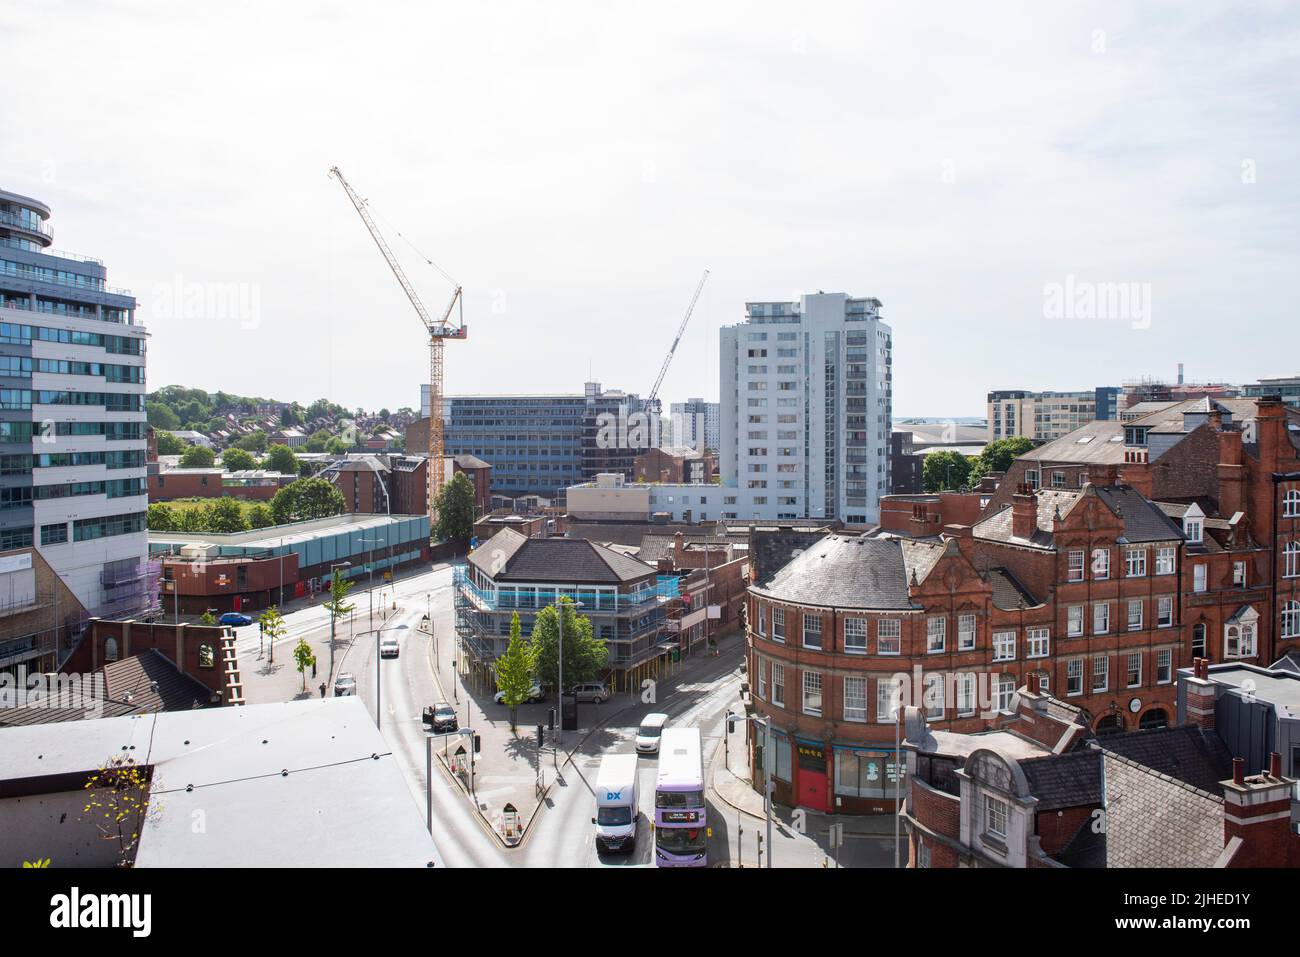 View Southeast towards Huntingdon Street from the roof of the Confetti Building in Nottingham City, Nottinghamshire England UK Stock Photo